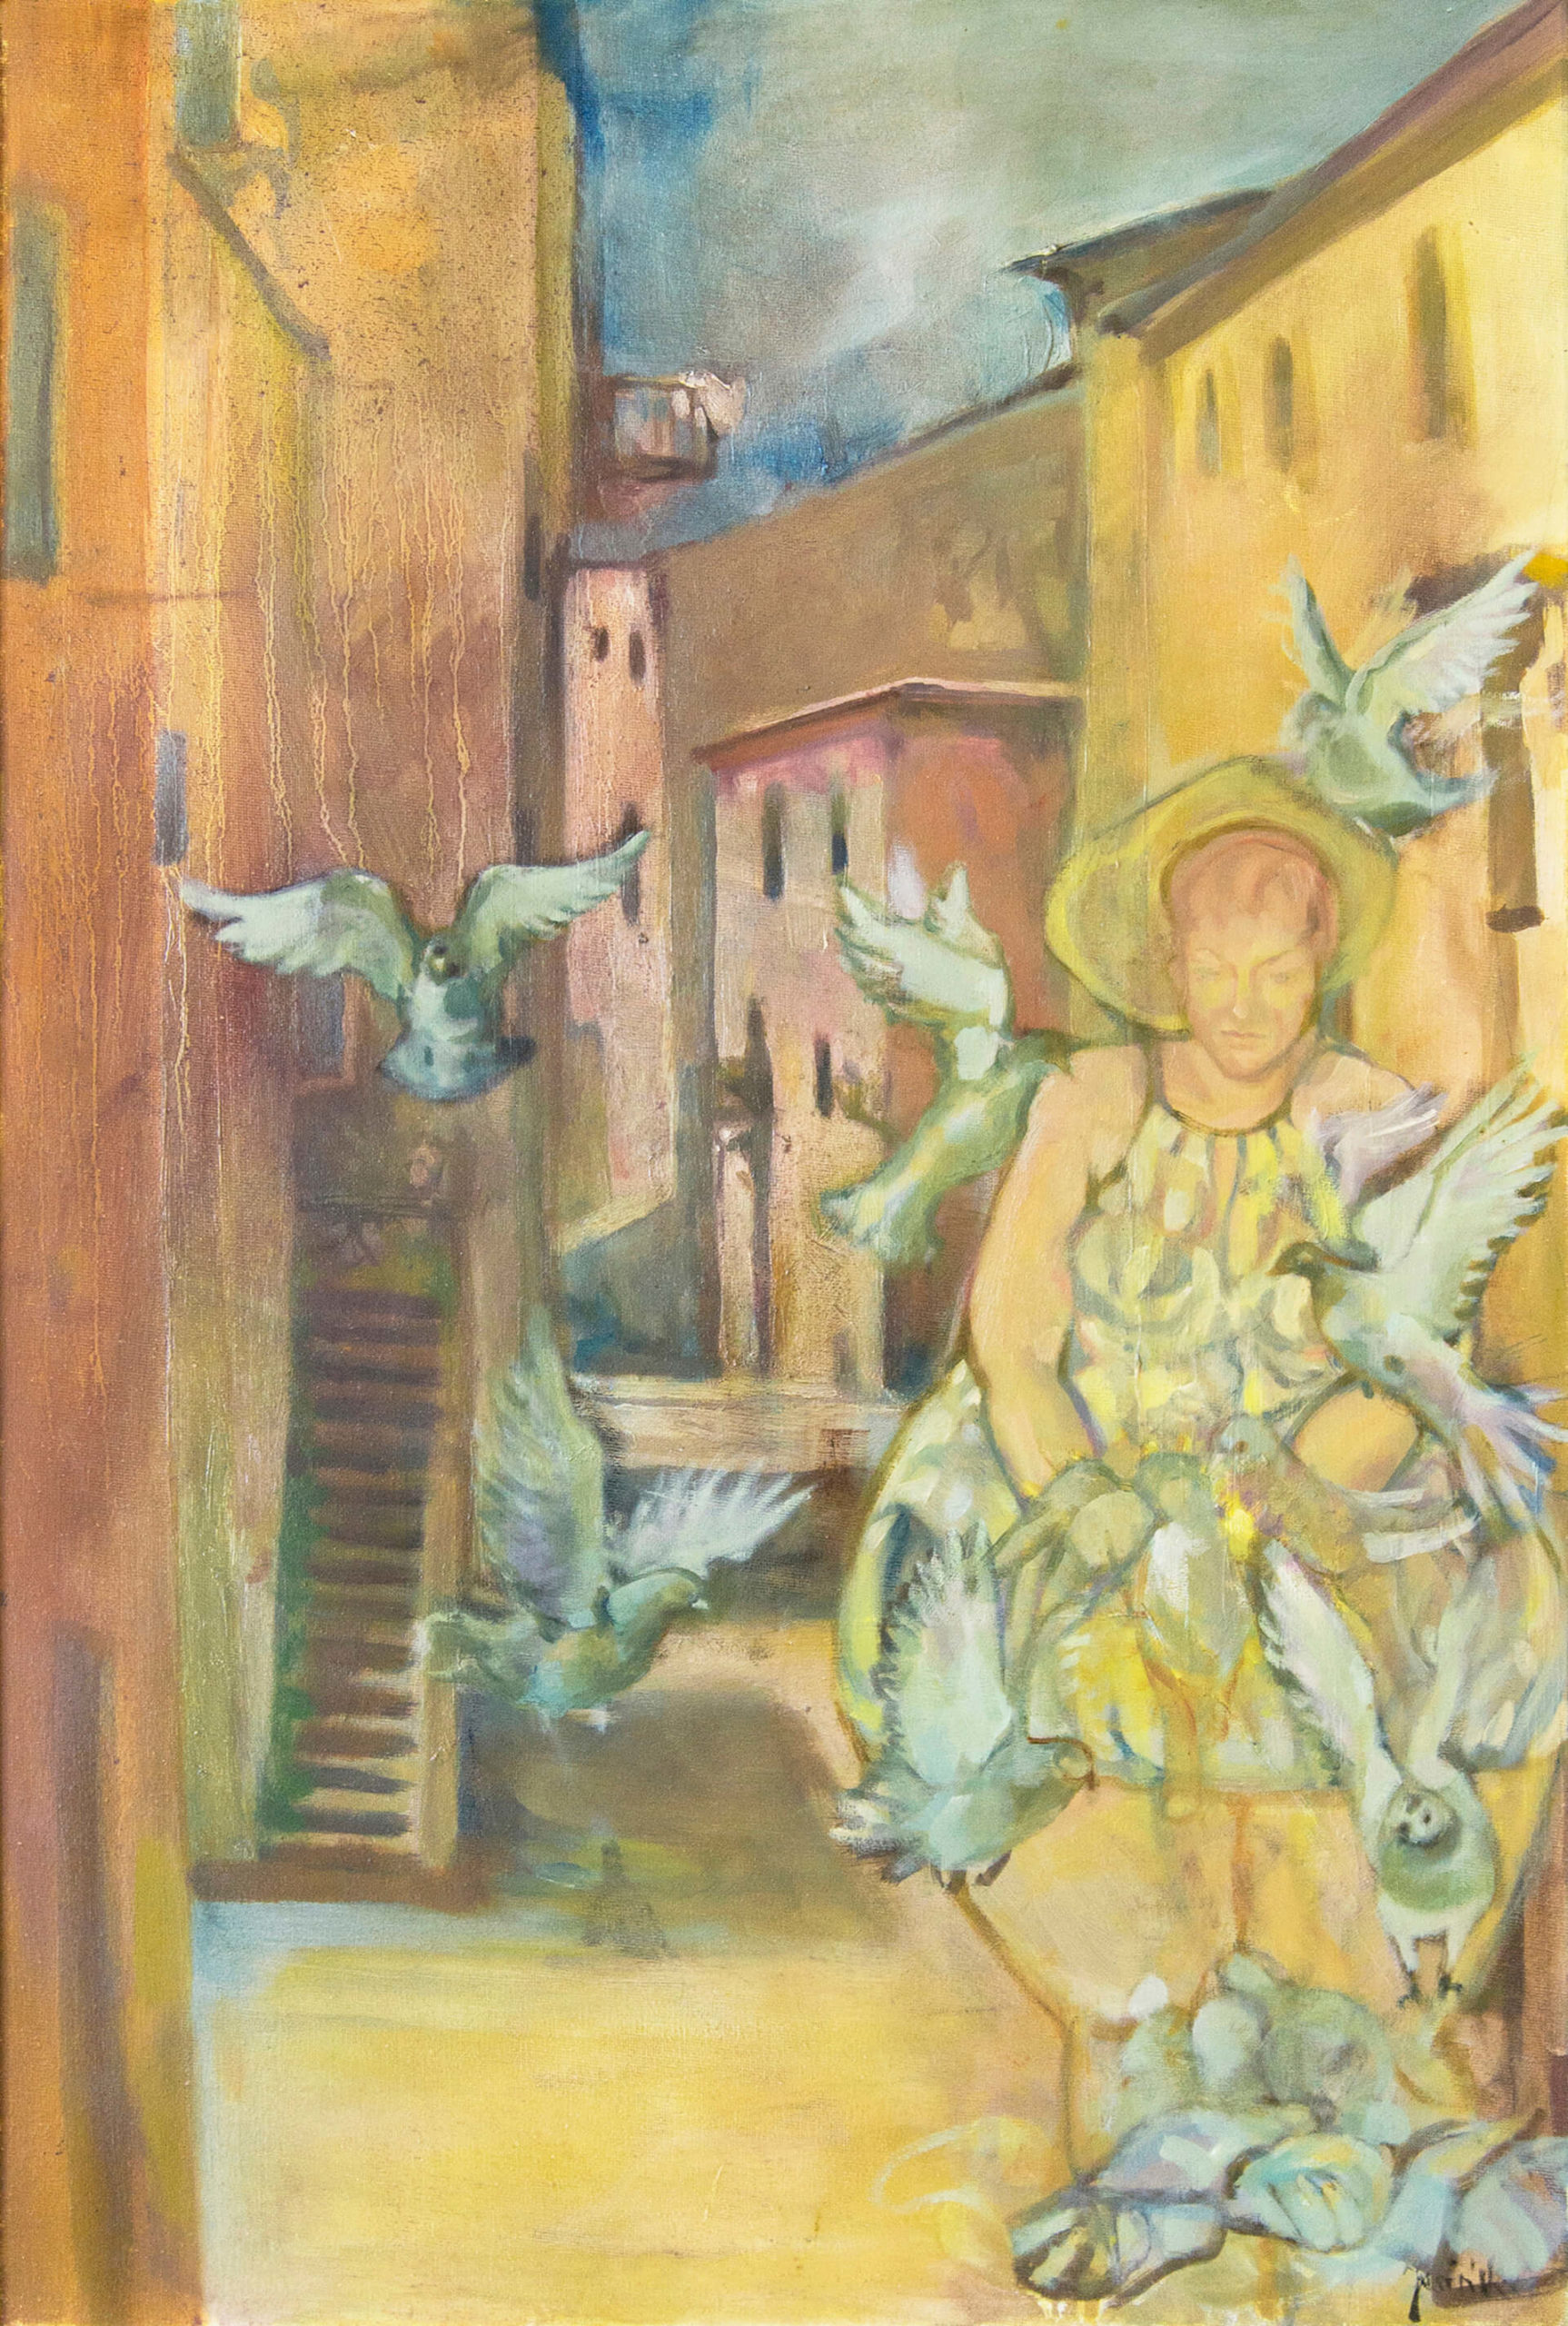 Lady with birds. Oil on canvas. 